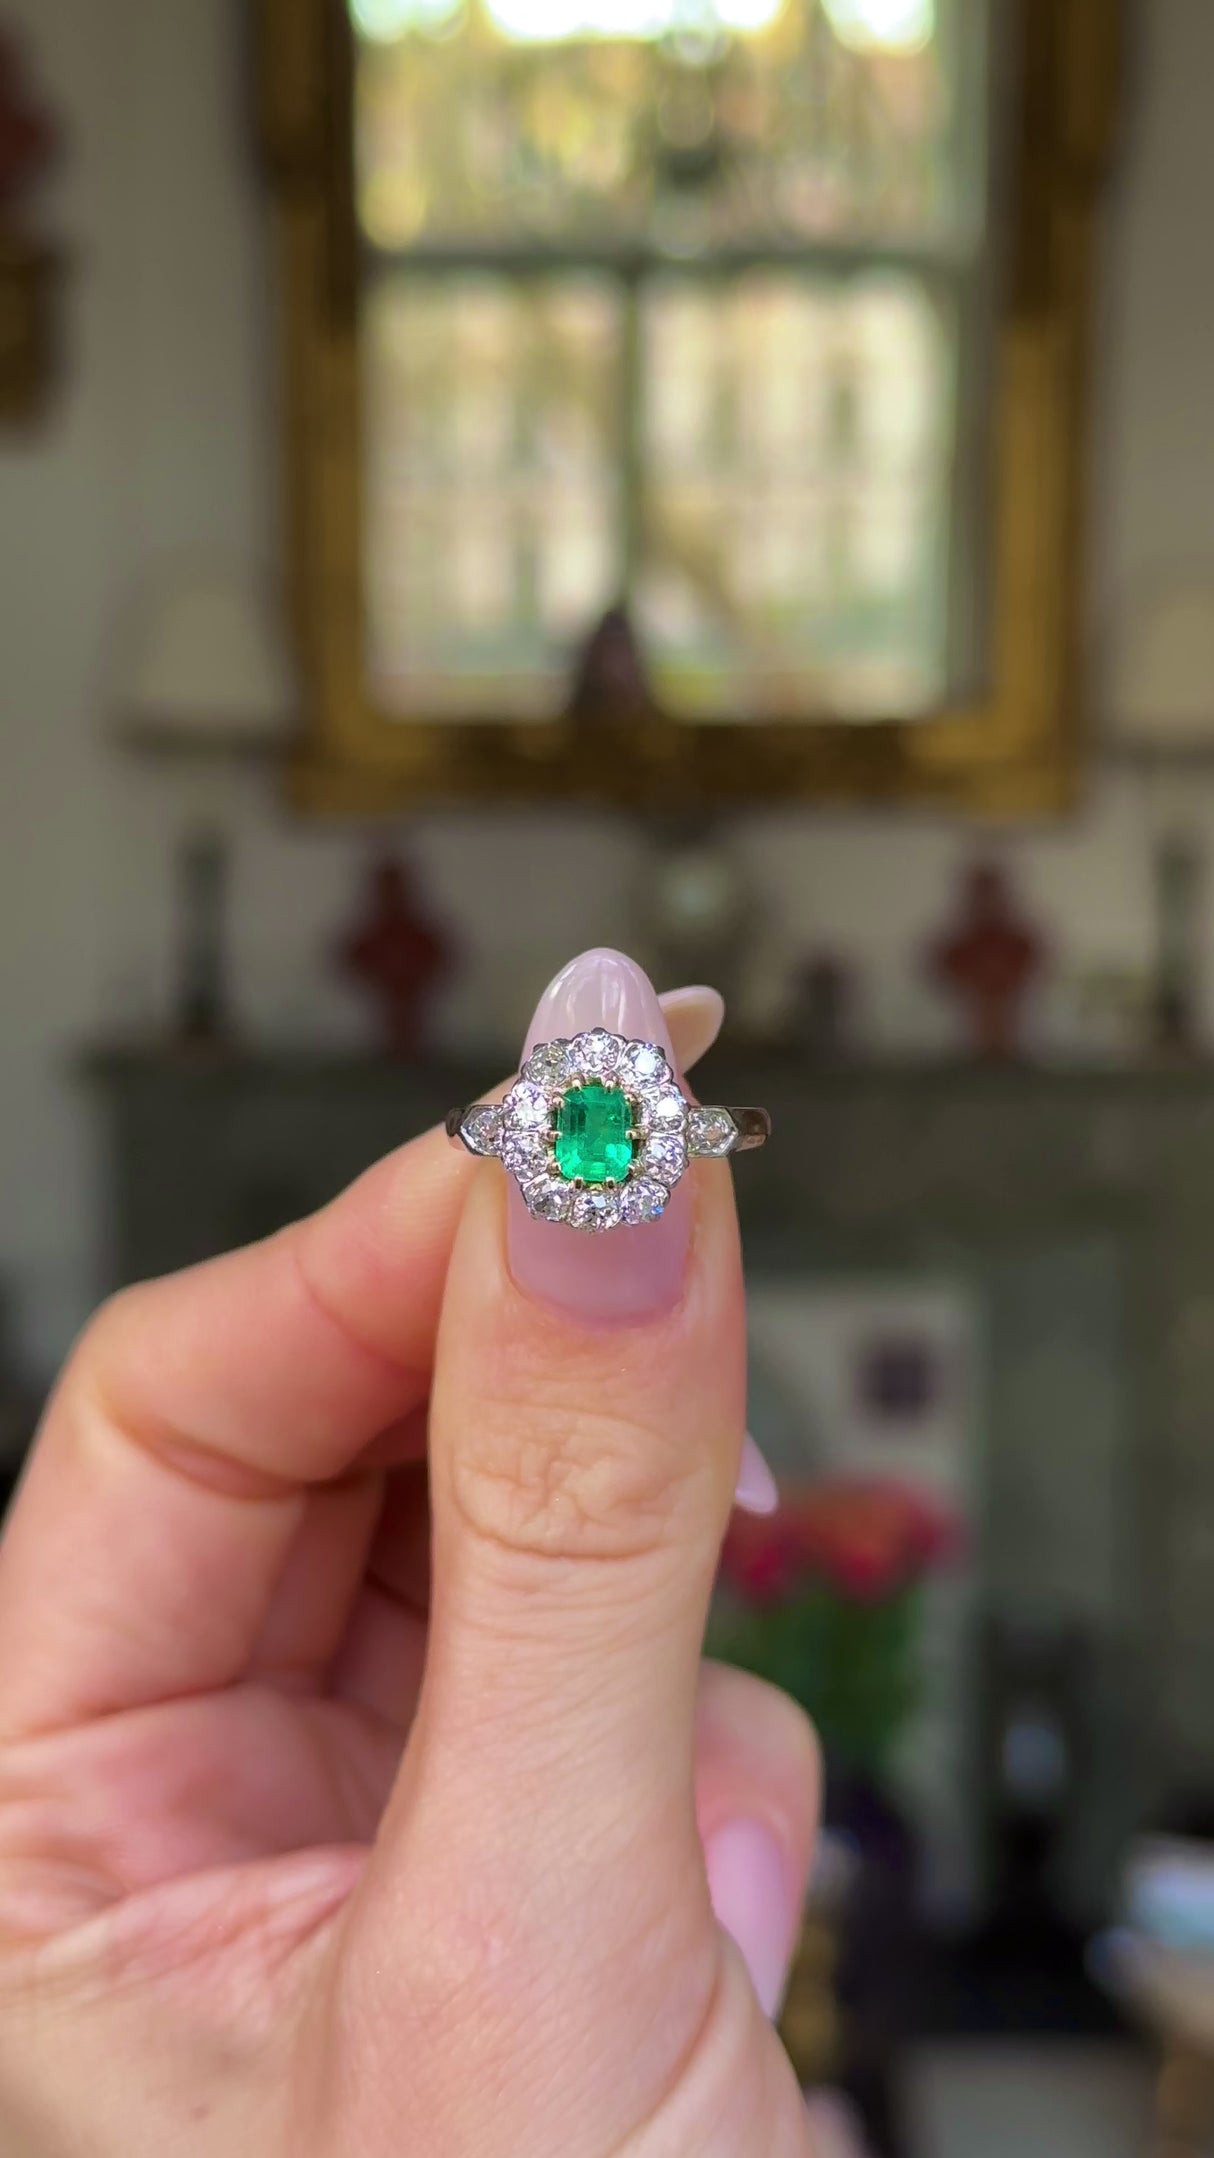 Edwardian emerald and diamond ring held in fingers and moved around to give perspective.